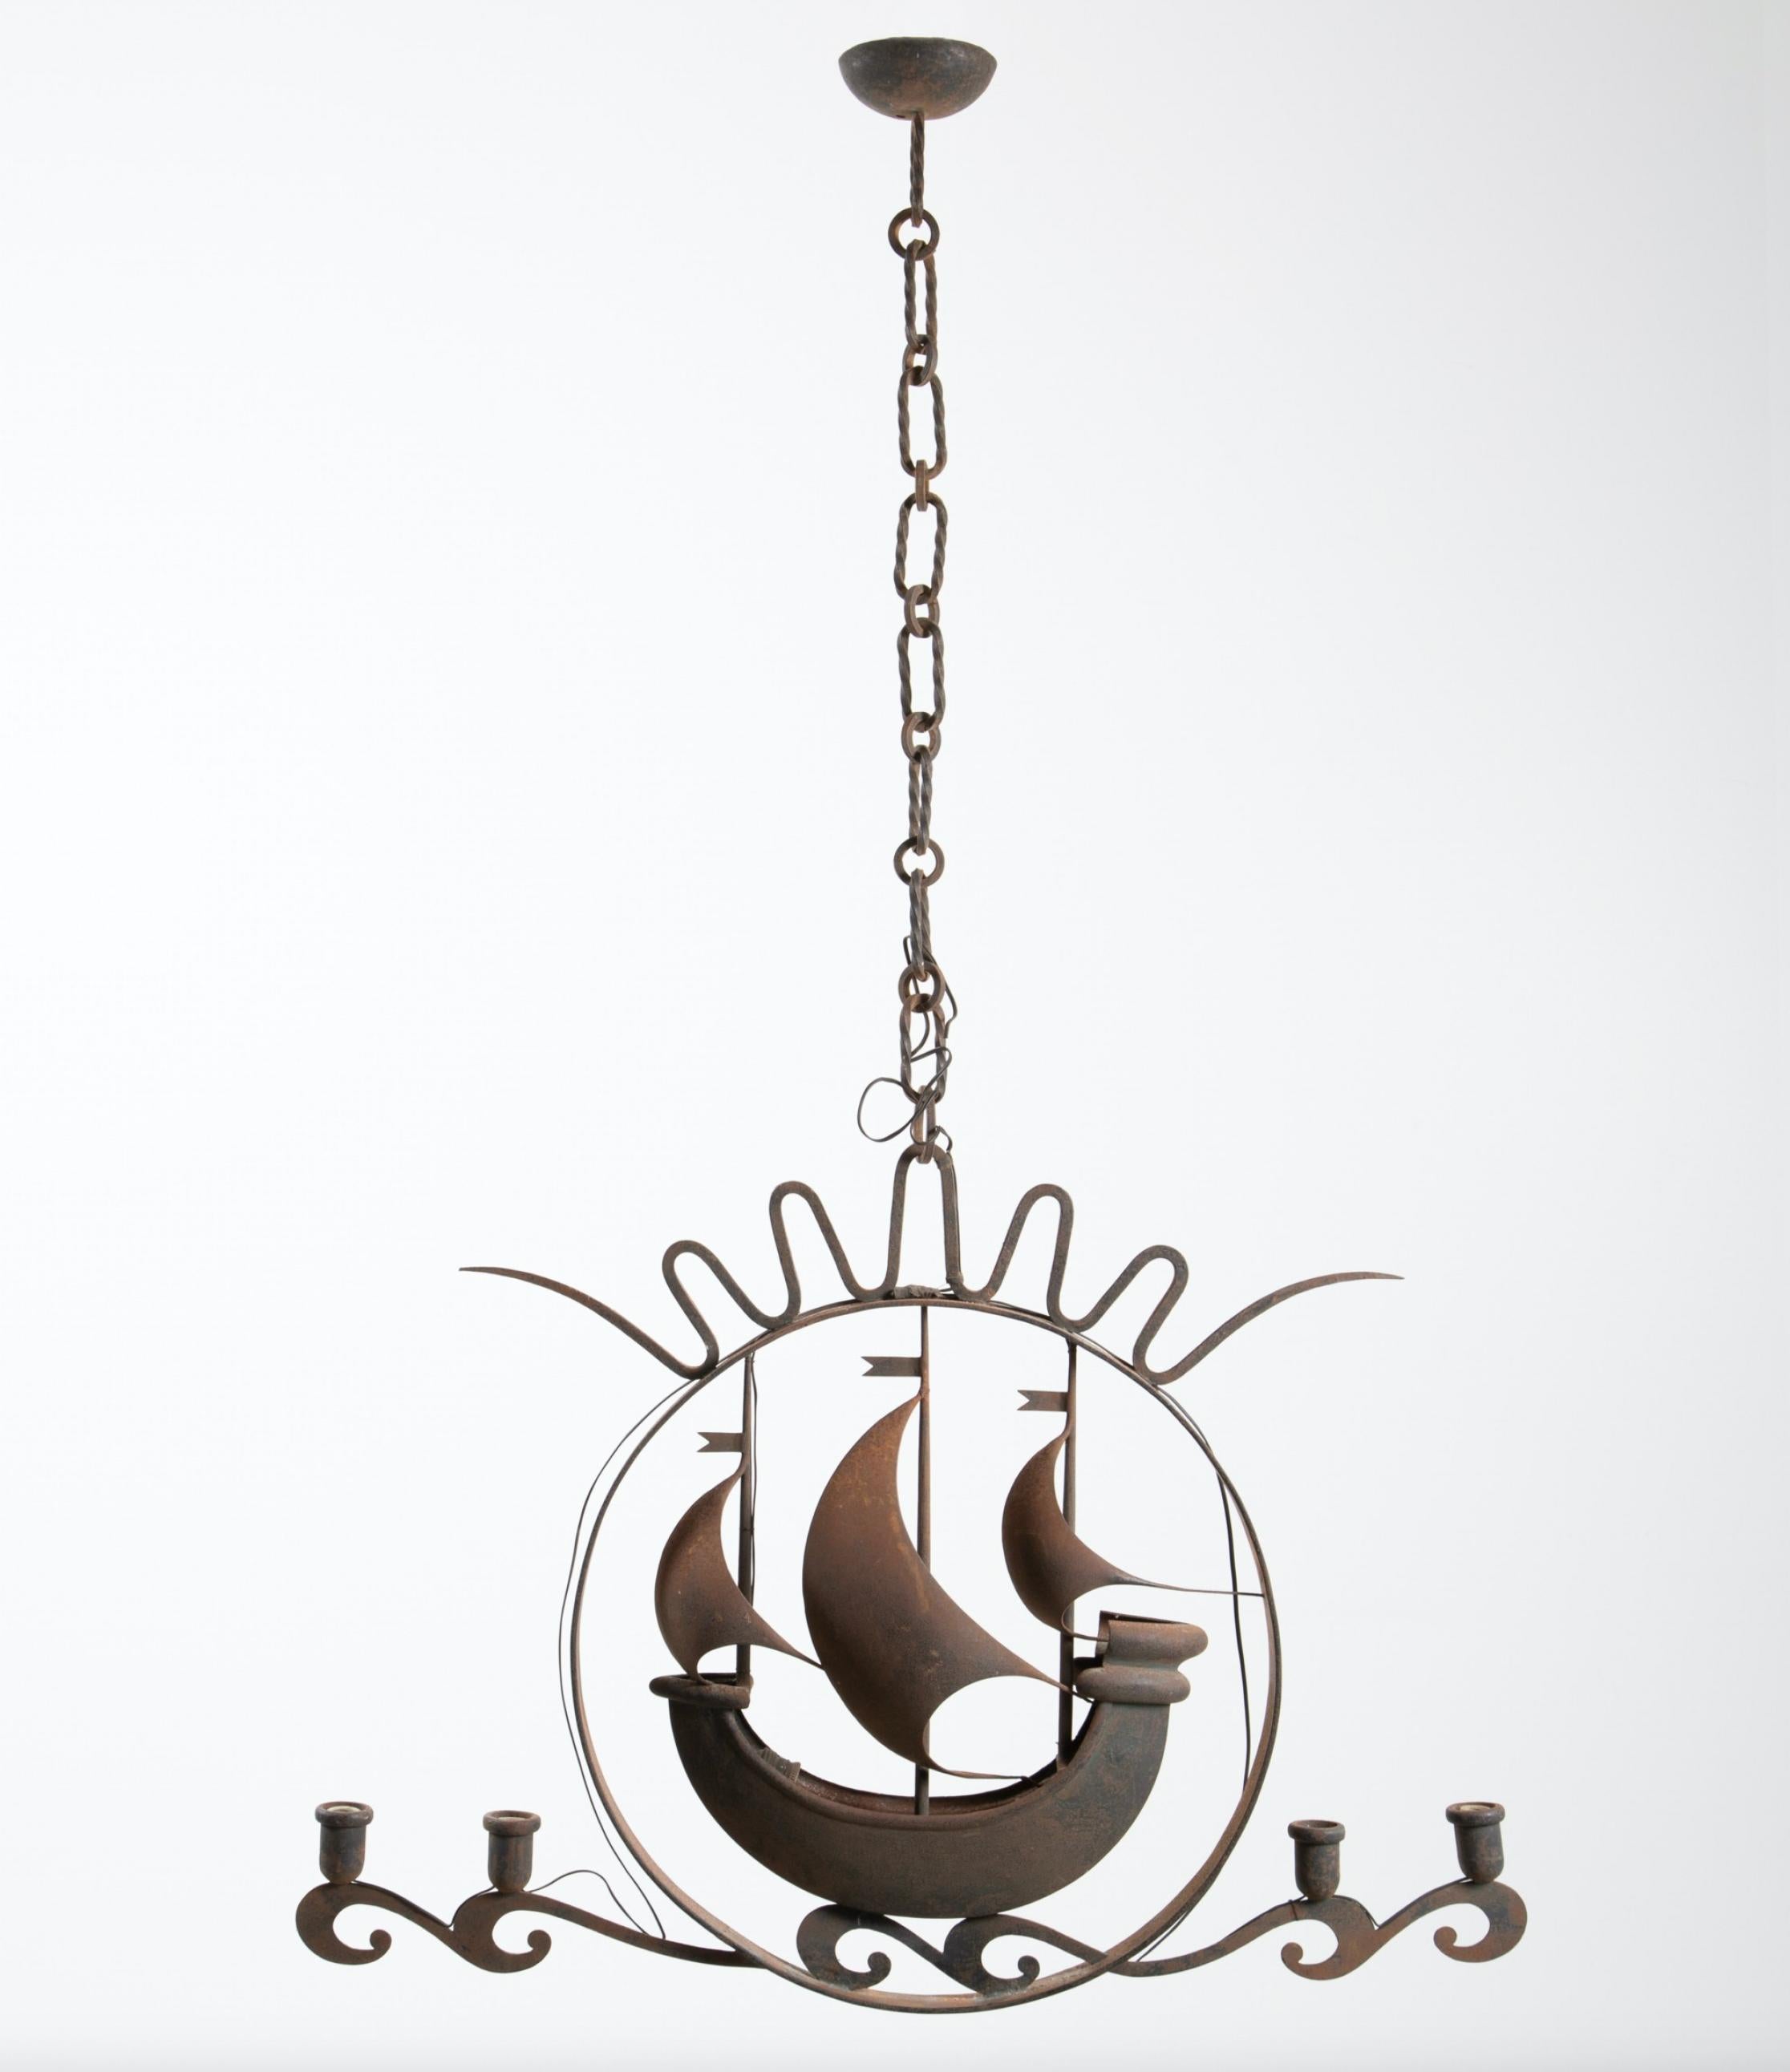 Attributed to Gio Ponti 1940s Italian iron hanging lamp in the form of a sailing ship vessel with three masts enclosed within a thin, circular framework resting on stylized waves, each with an attached light fixture; hanging chain atop.
Identical